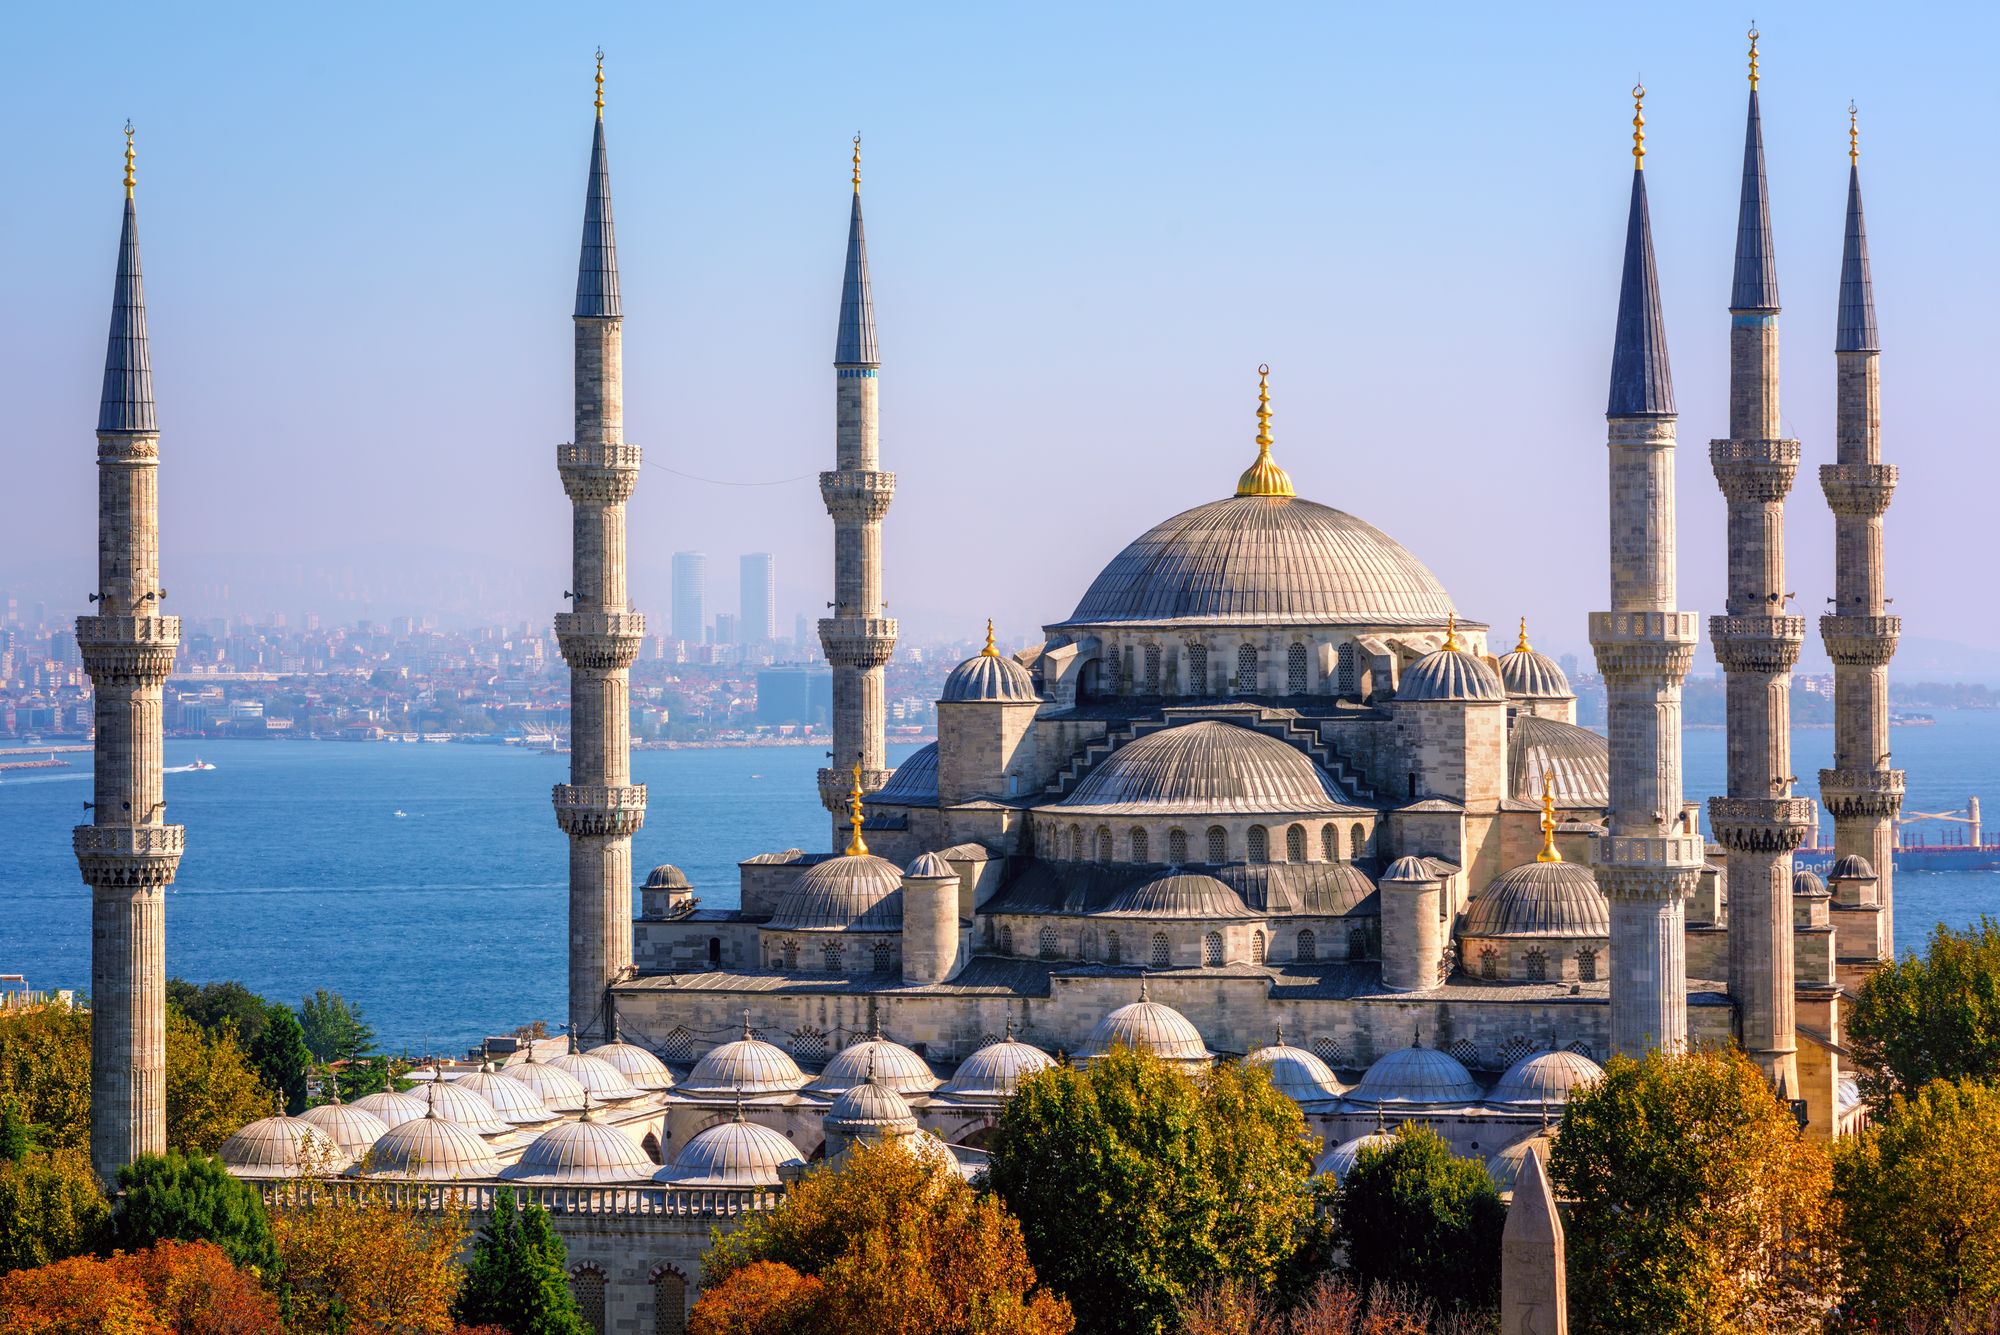 Sultan Ahmed Mosque, also known as the Blue Mosque